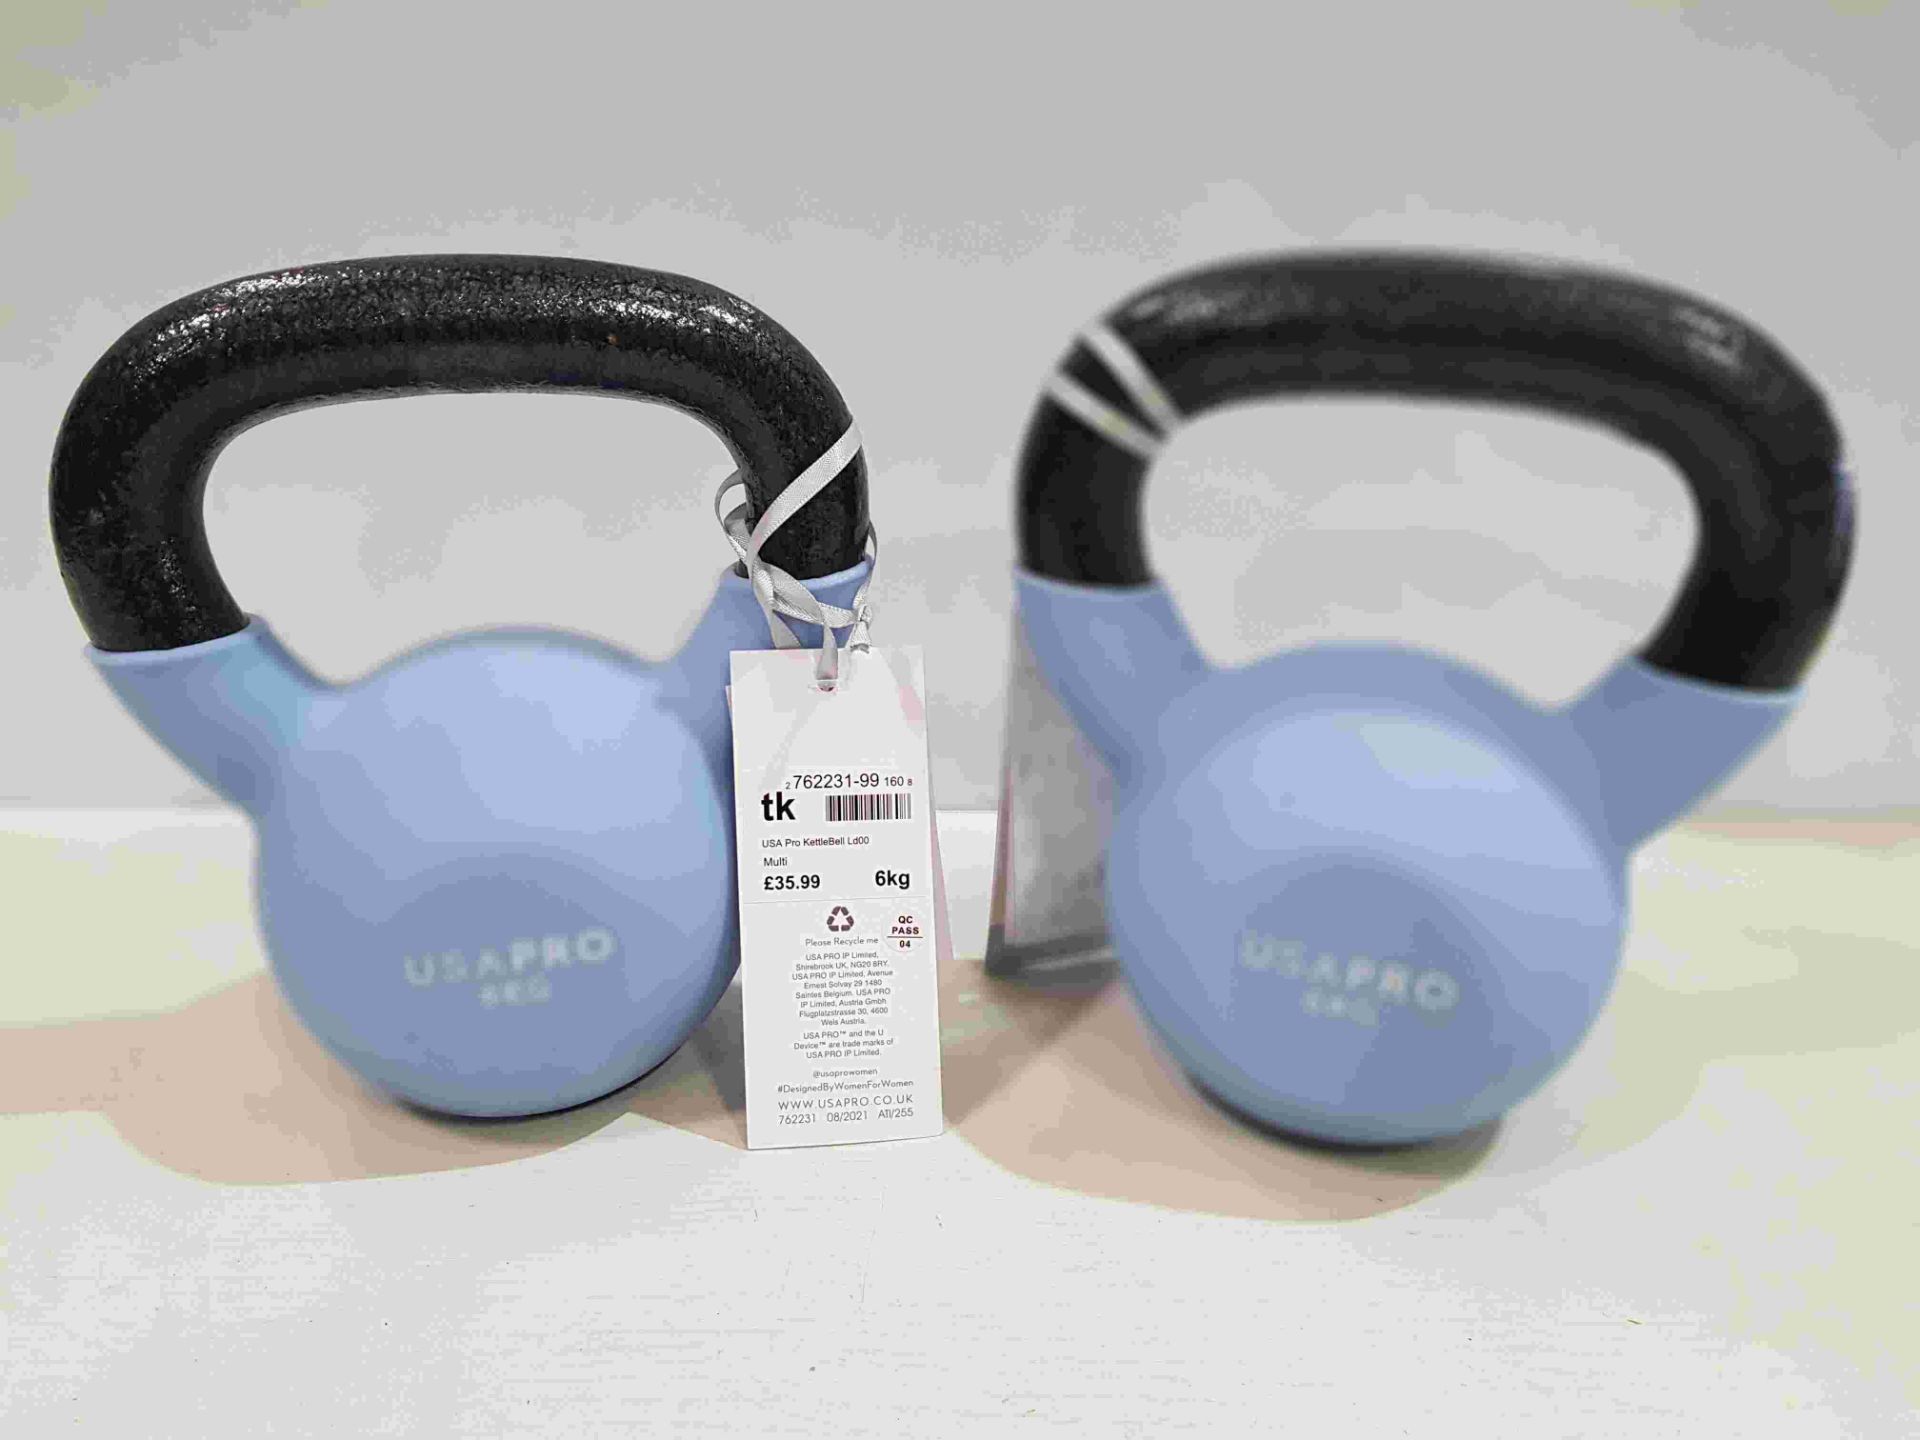 24 X BRAND NEW USA PRO 6 KG KETTLEBELLS ( 12 PAIRS ) - RRP £ 35.99 PP - £ TOTAL RRP £ 863.76 - ALL